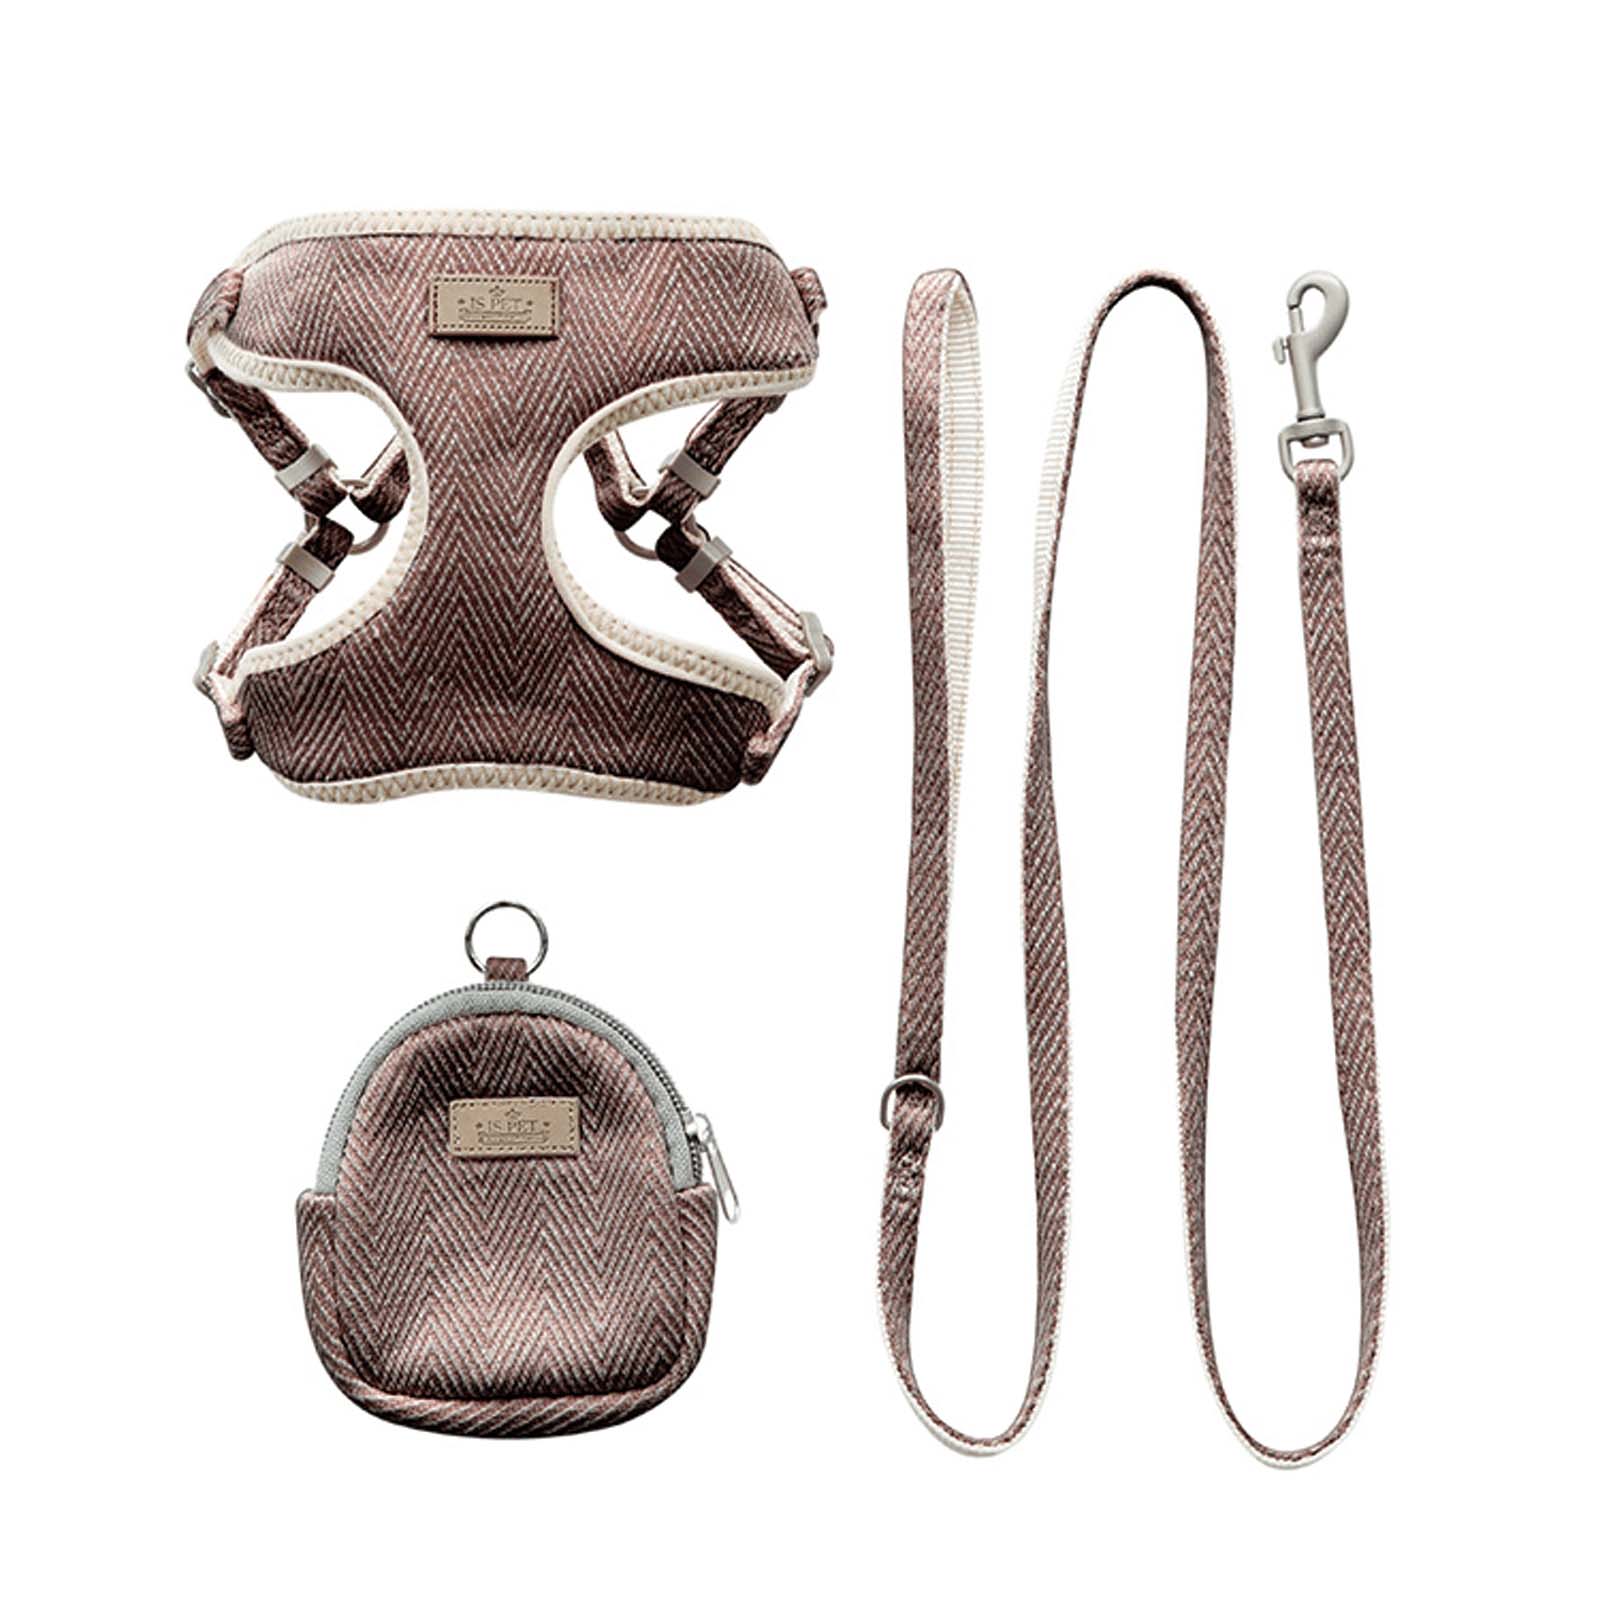 Comfort Soft Curve Shape Dog Harness & Leash (Two-in-one Set)